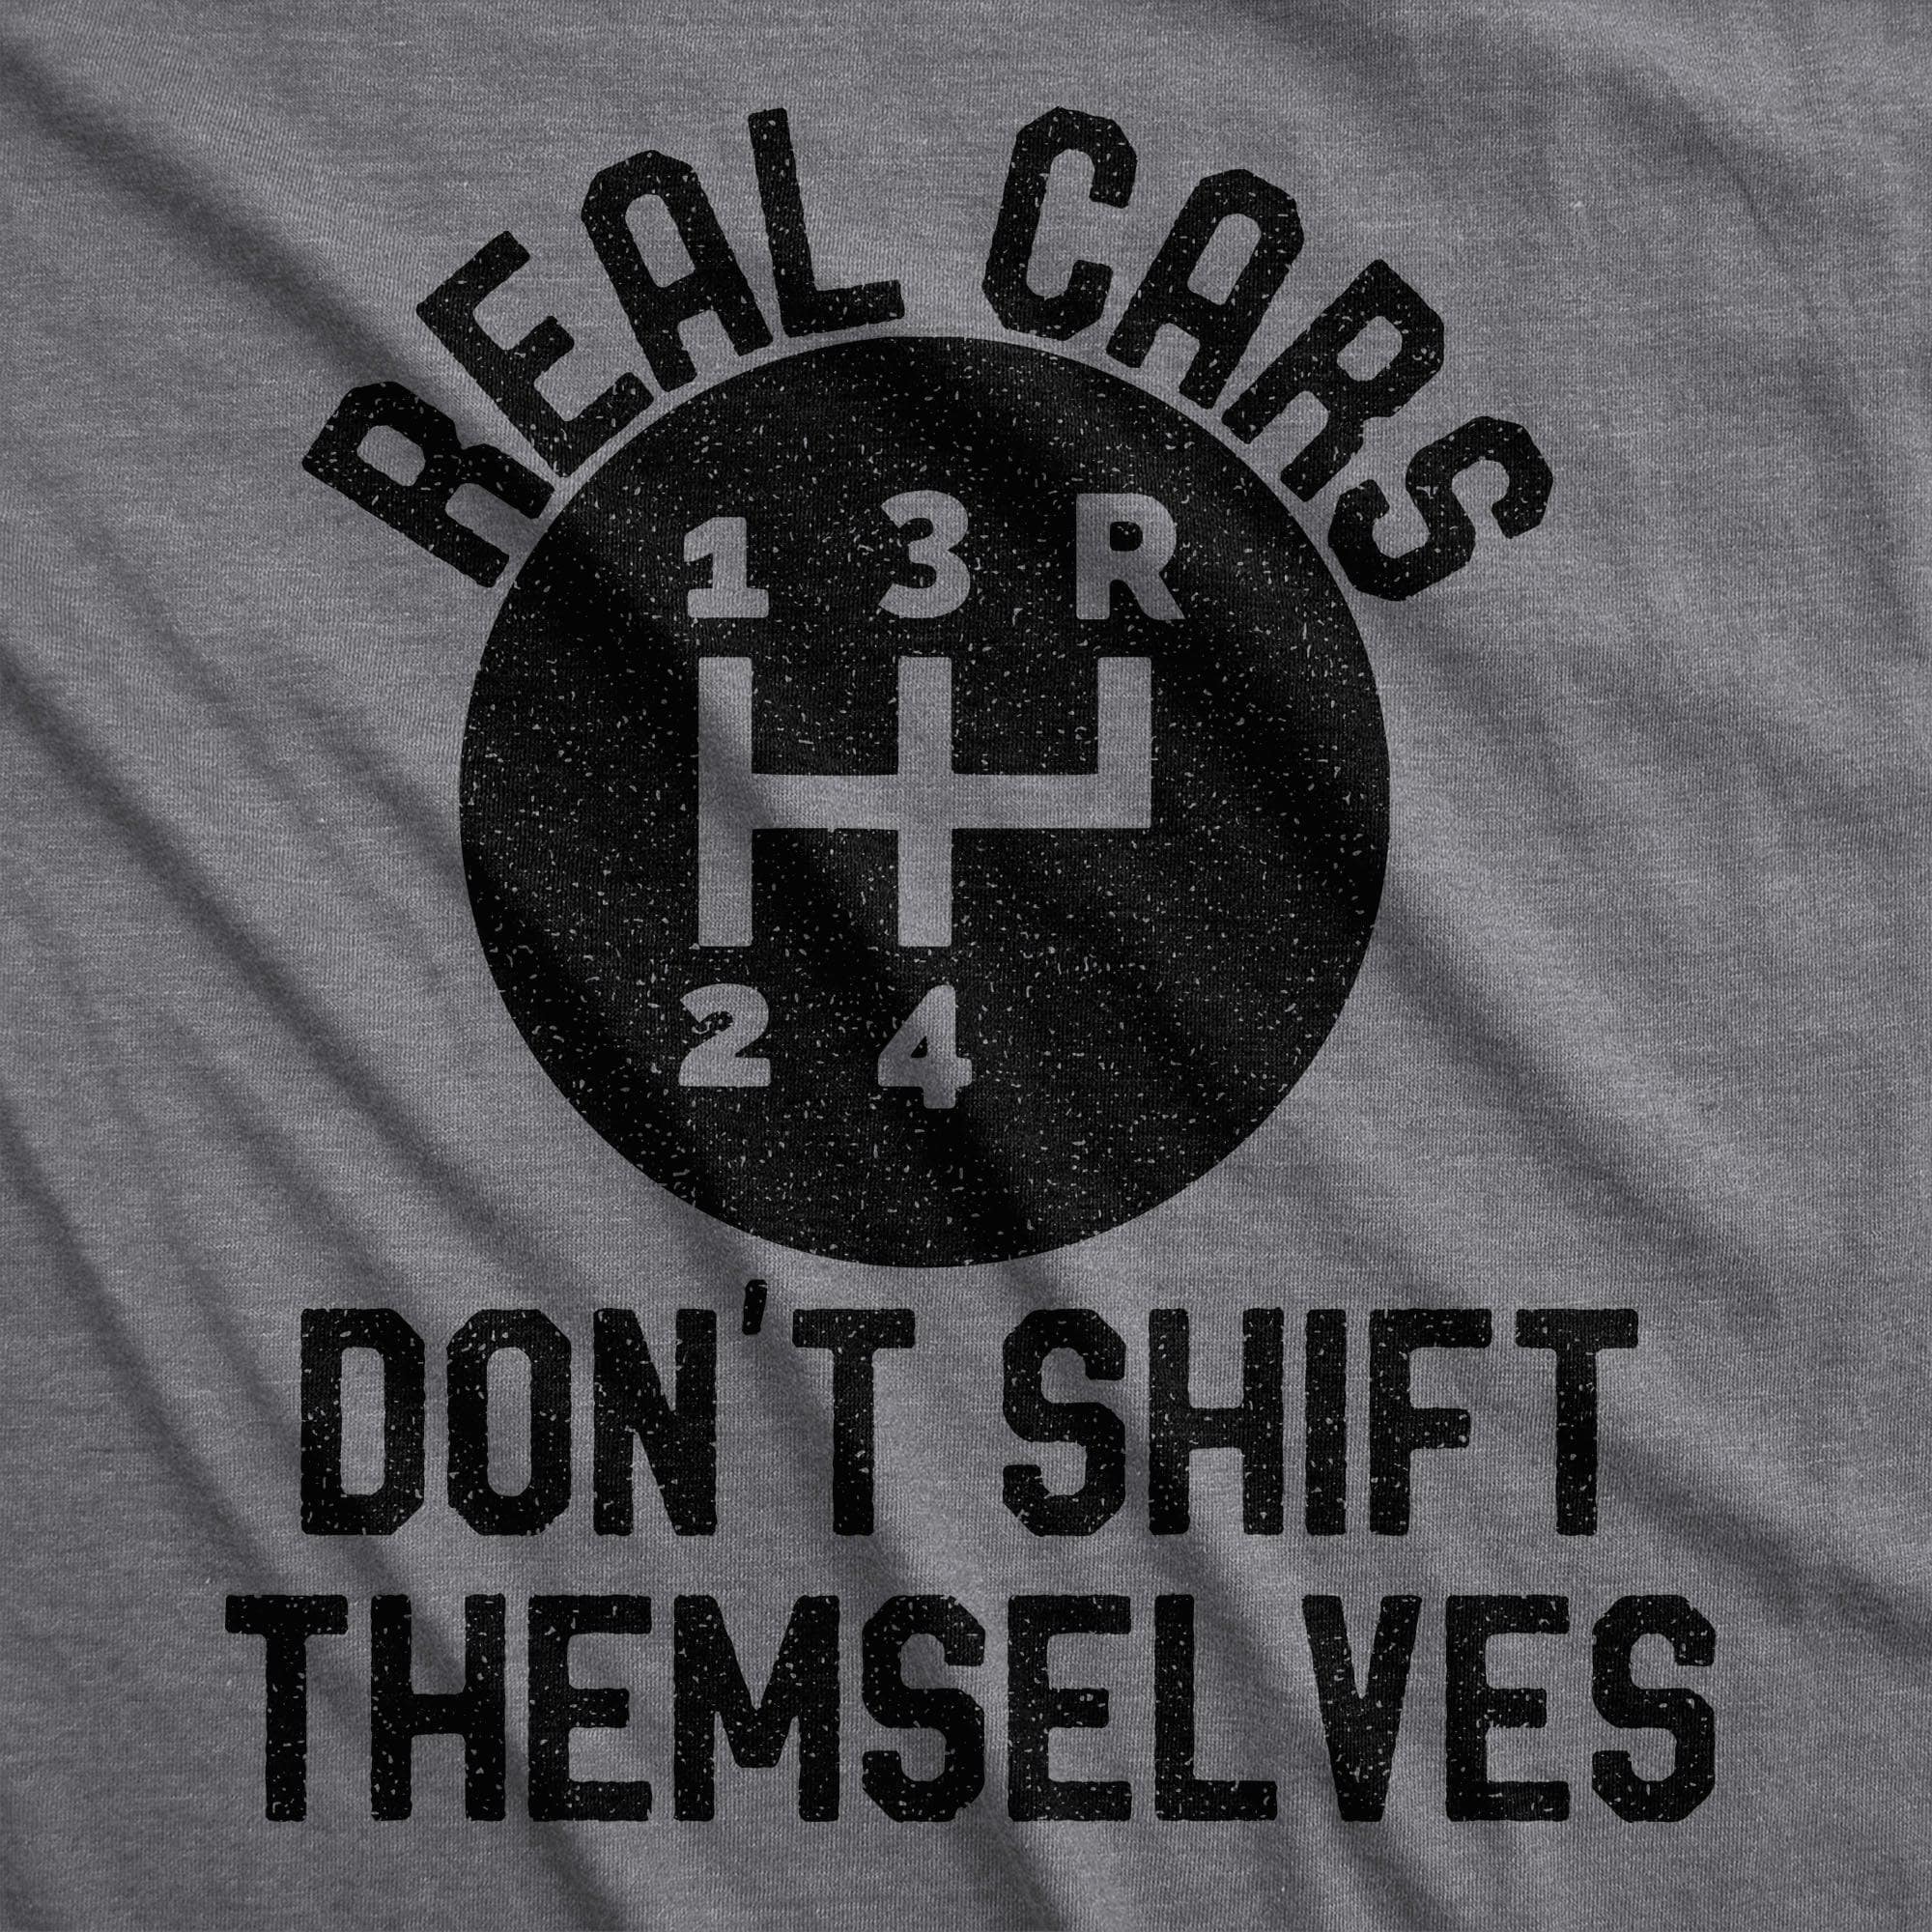 Real Cars Don't Shift Themselves Men's Tshirt  -  Crazy Dog T-Shirts